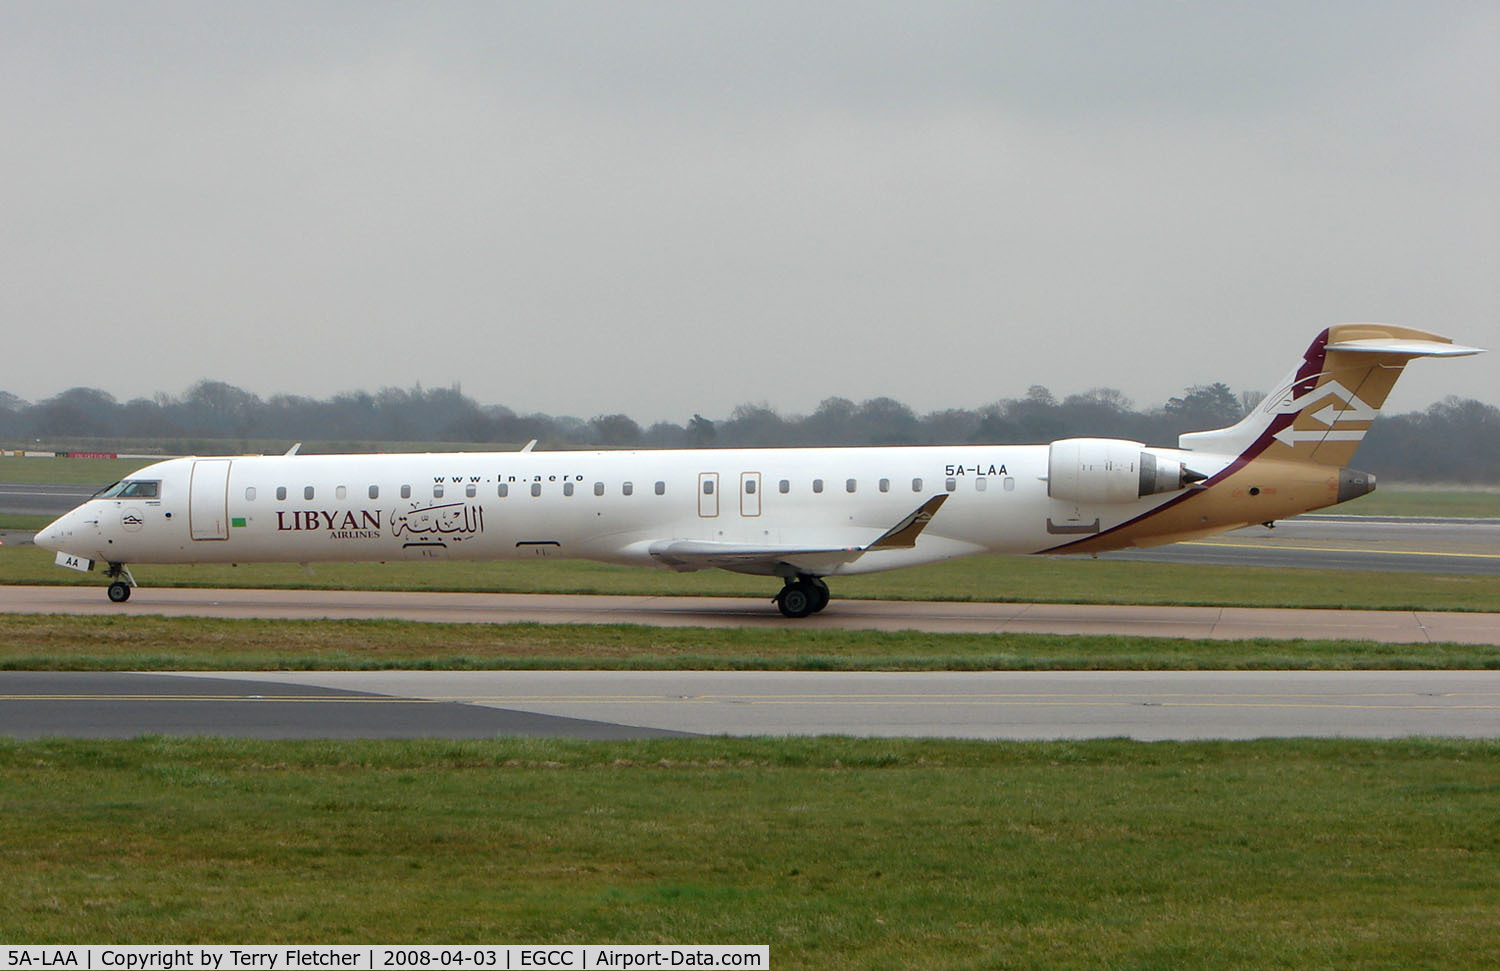 5A-LAA, 2007 Bombardier CRJ-900ER (CL-600-2D24) C/N 15120, Libyian Arab Airlines now operate their new CLRJ900 into Manchester (UK) on Sundays and Thursdays as LN106